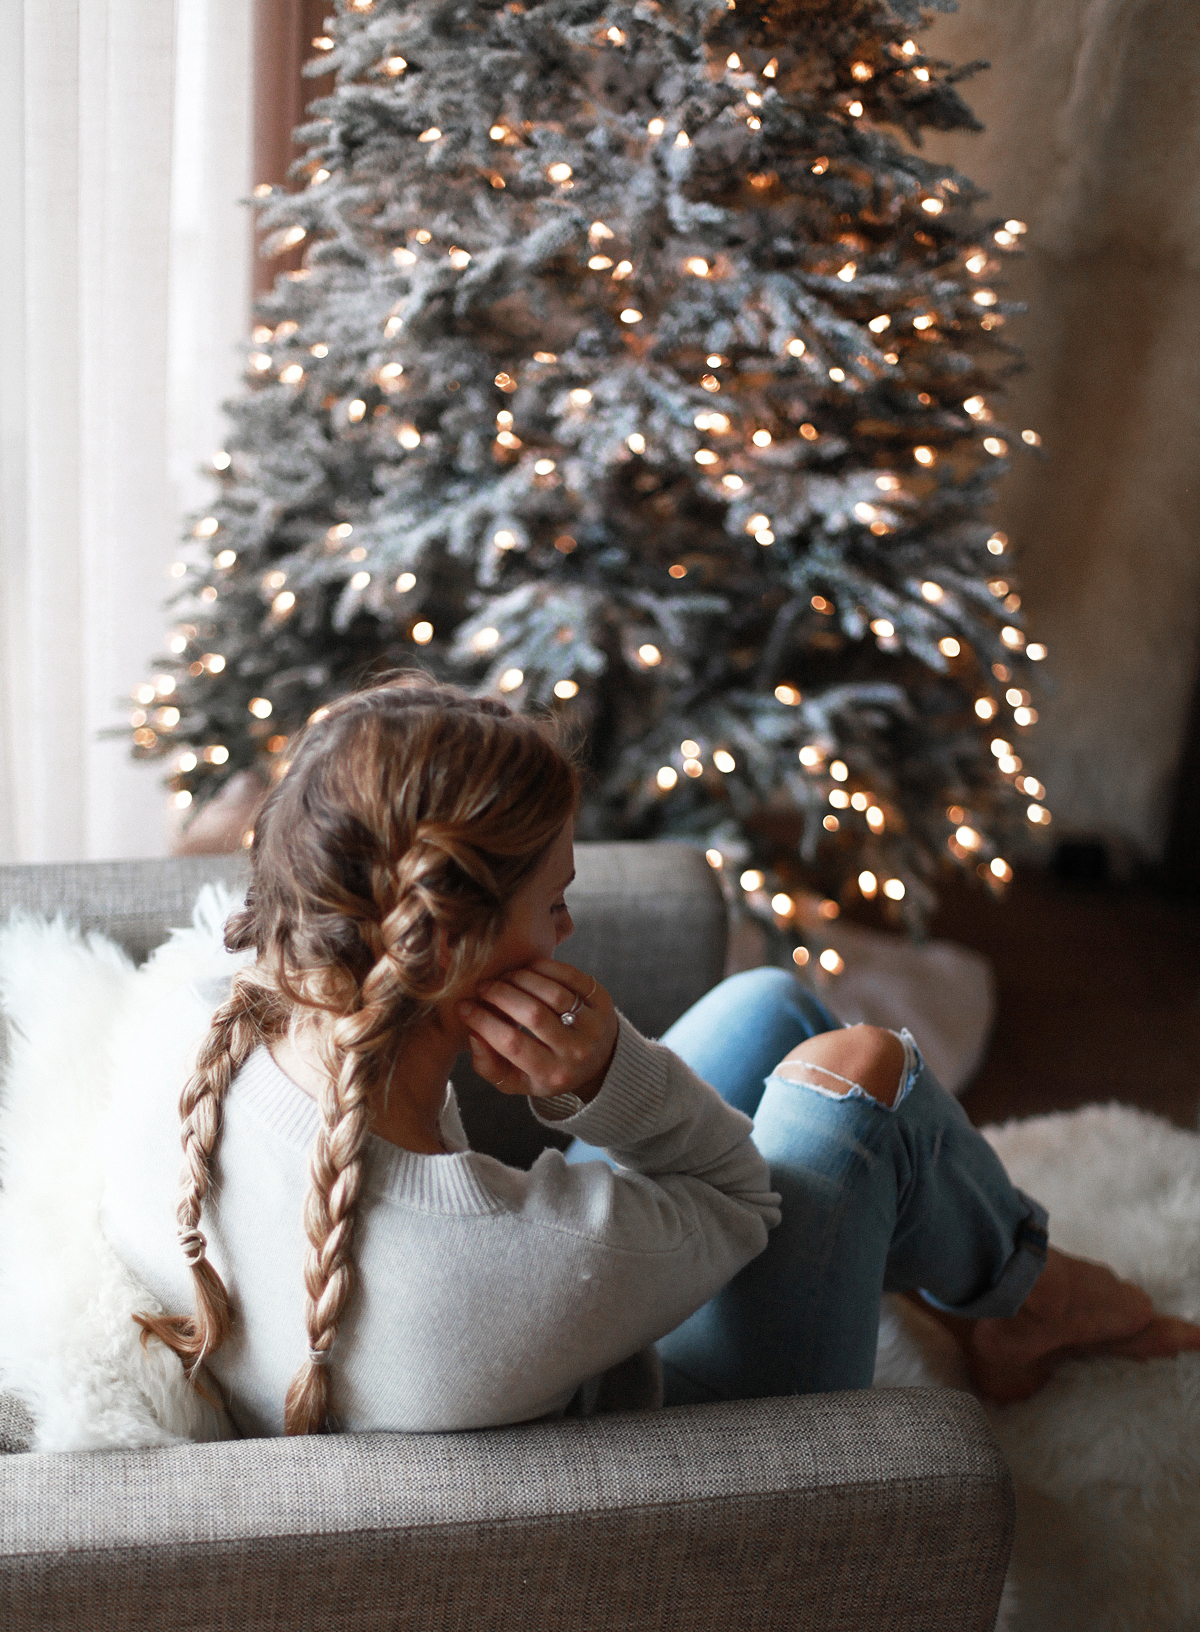 Lifestyle blogger Lisa Hamilton from See Want Shop with her Christmas tree wearing denim jeans, braided hair & knit sweater